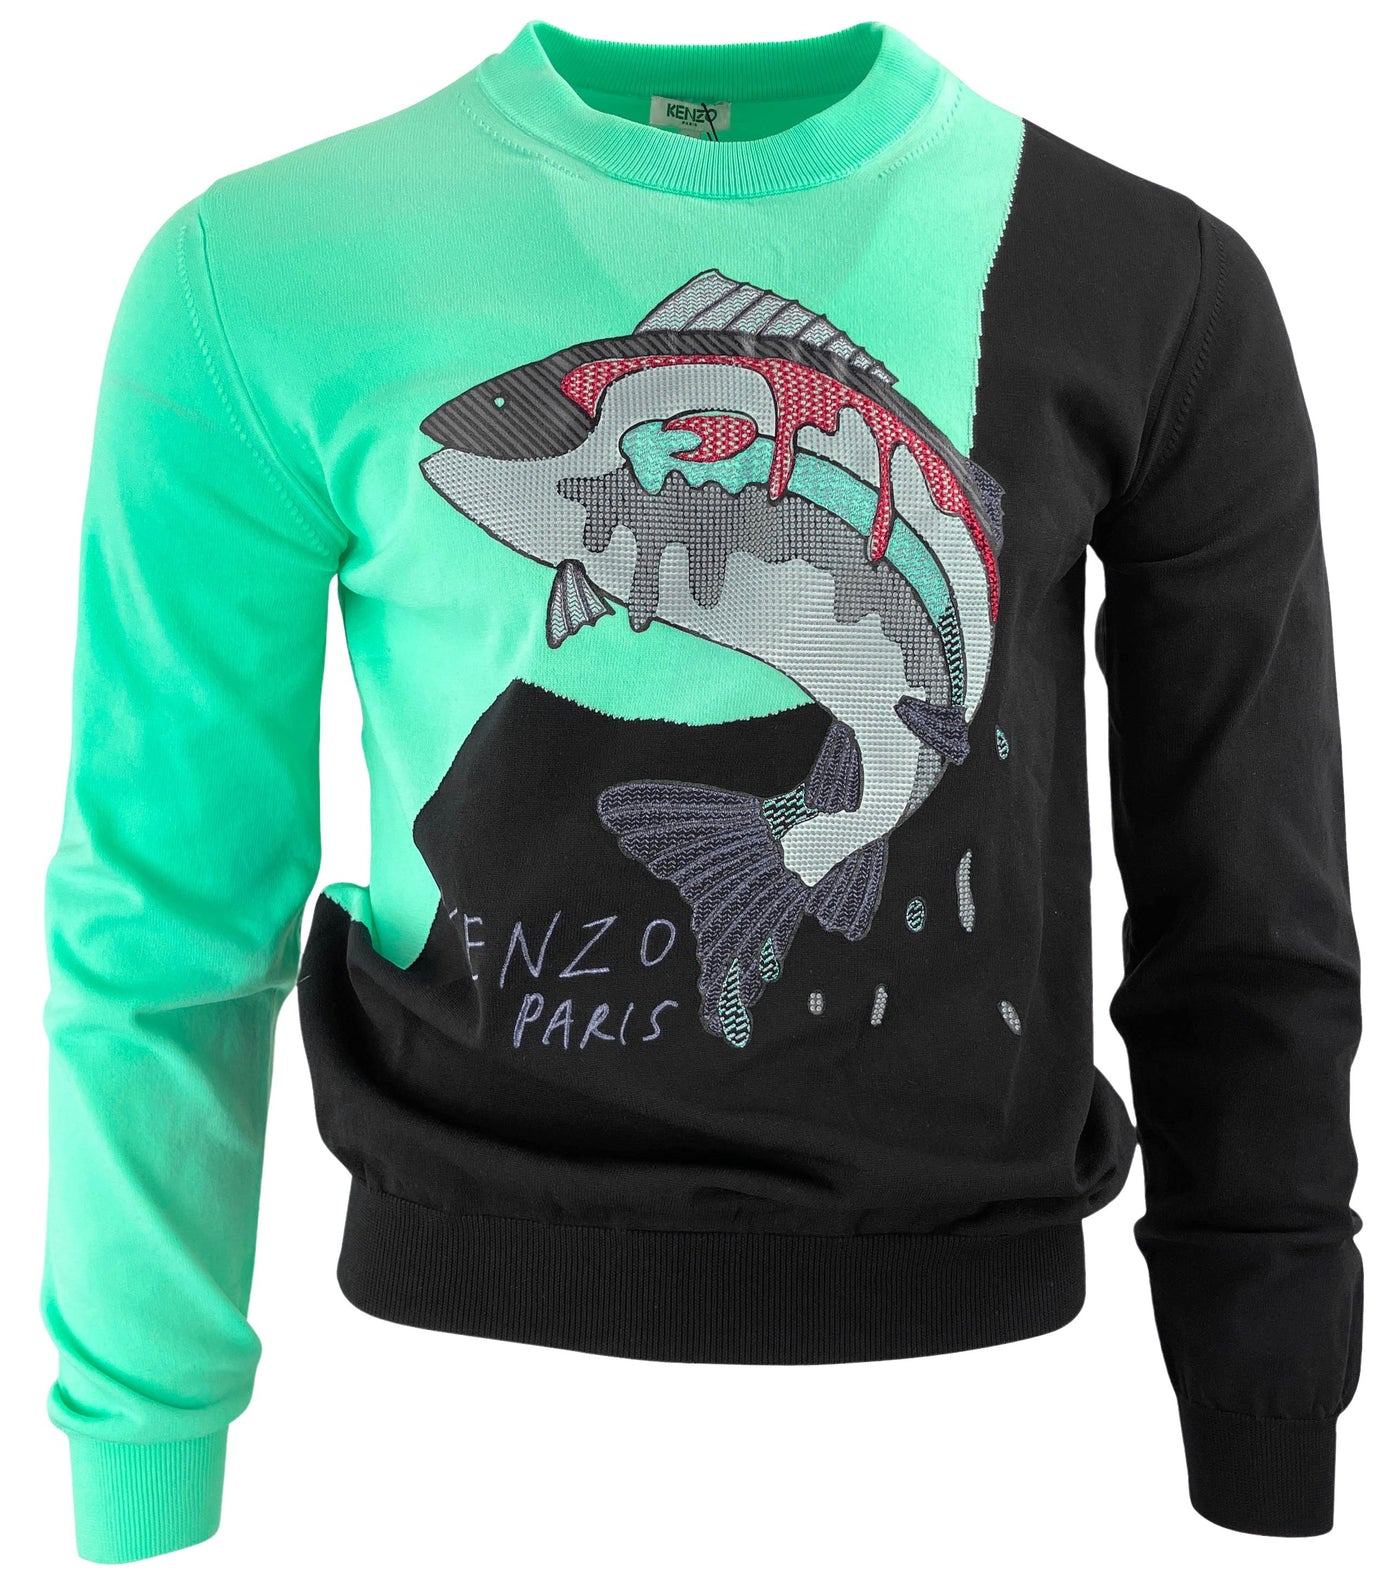 Kenzo Rubber Fish Sweatshirt in Mint Green and Black - Discounts on Kenzo at UAL